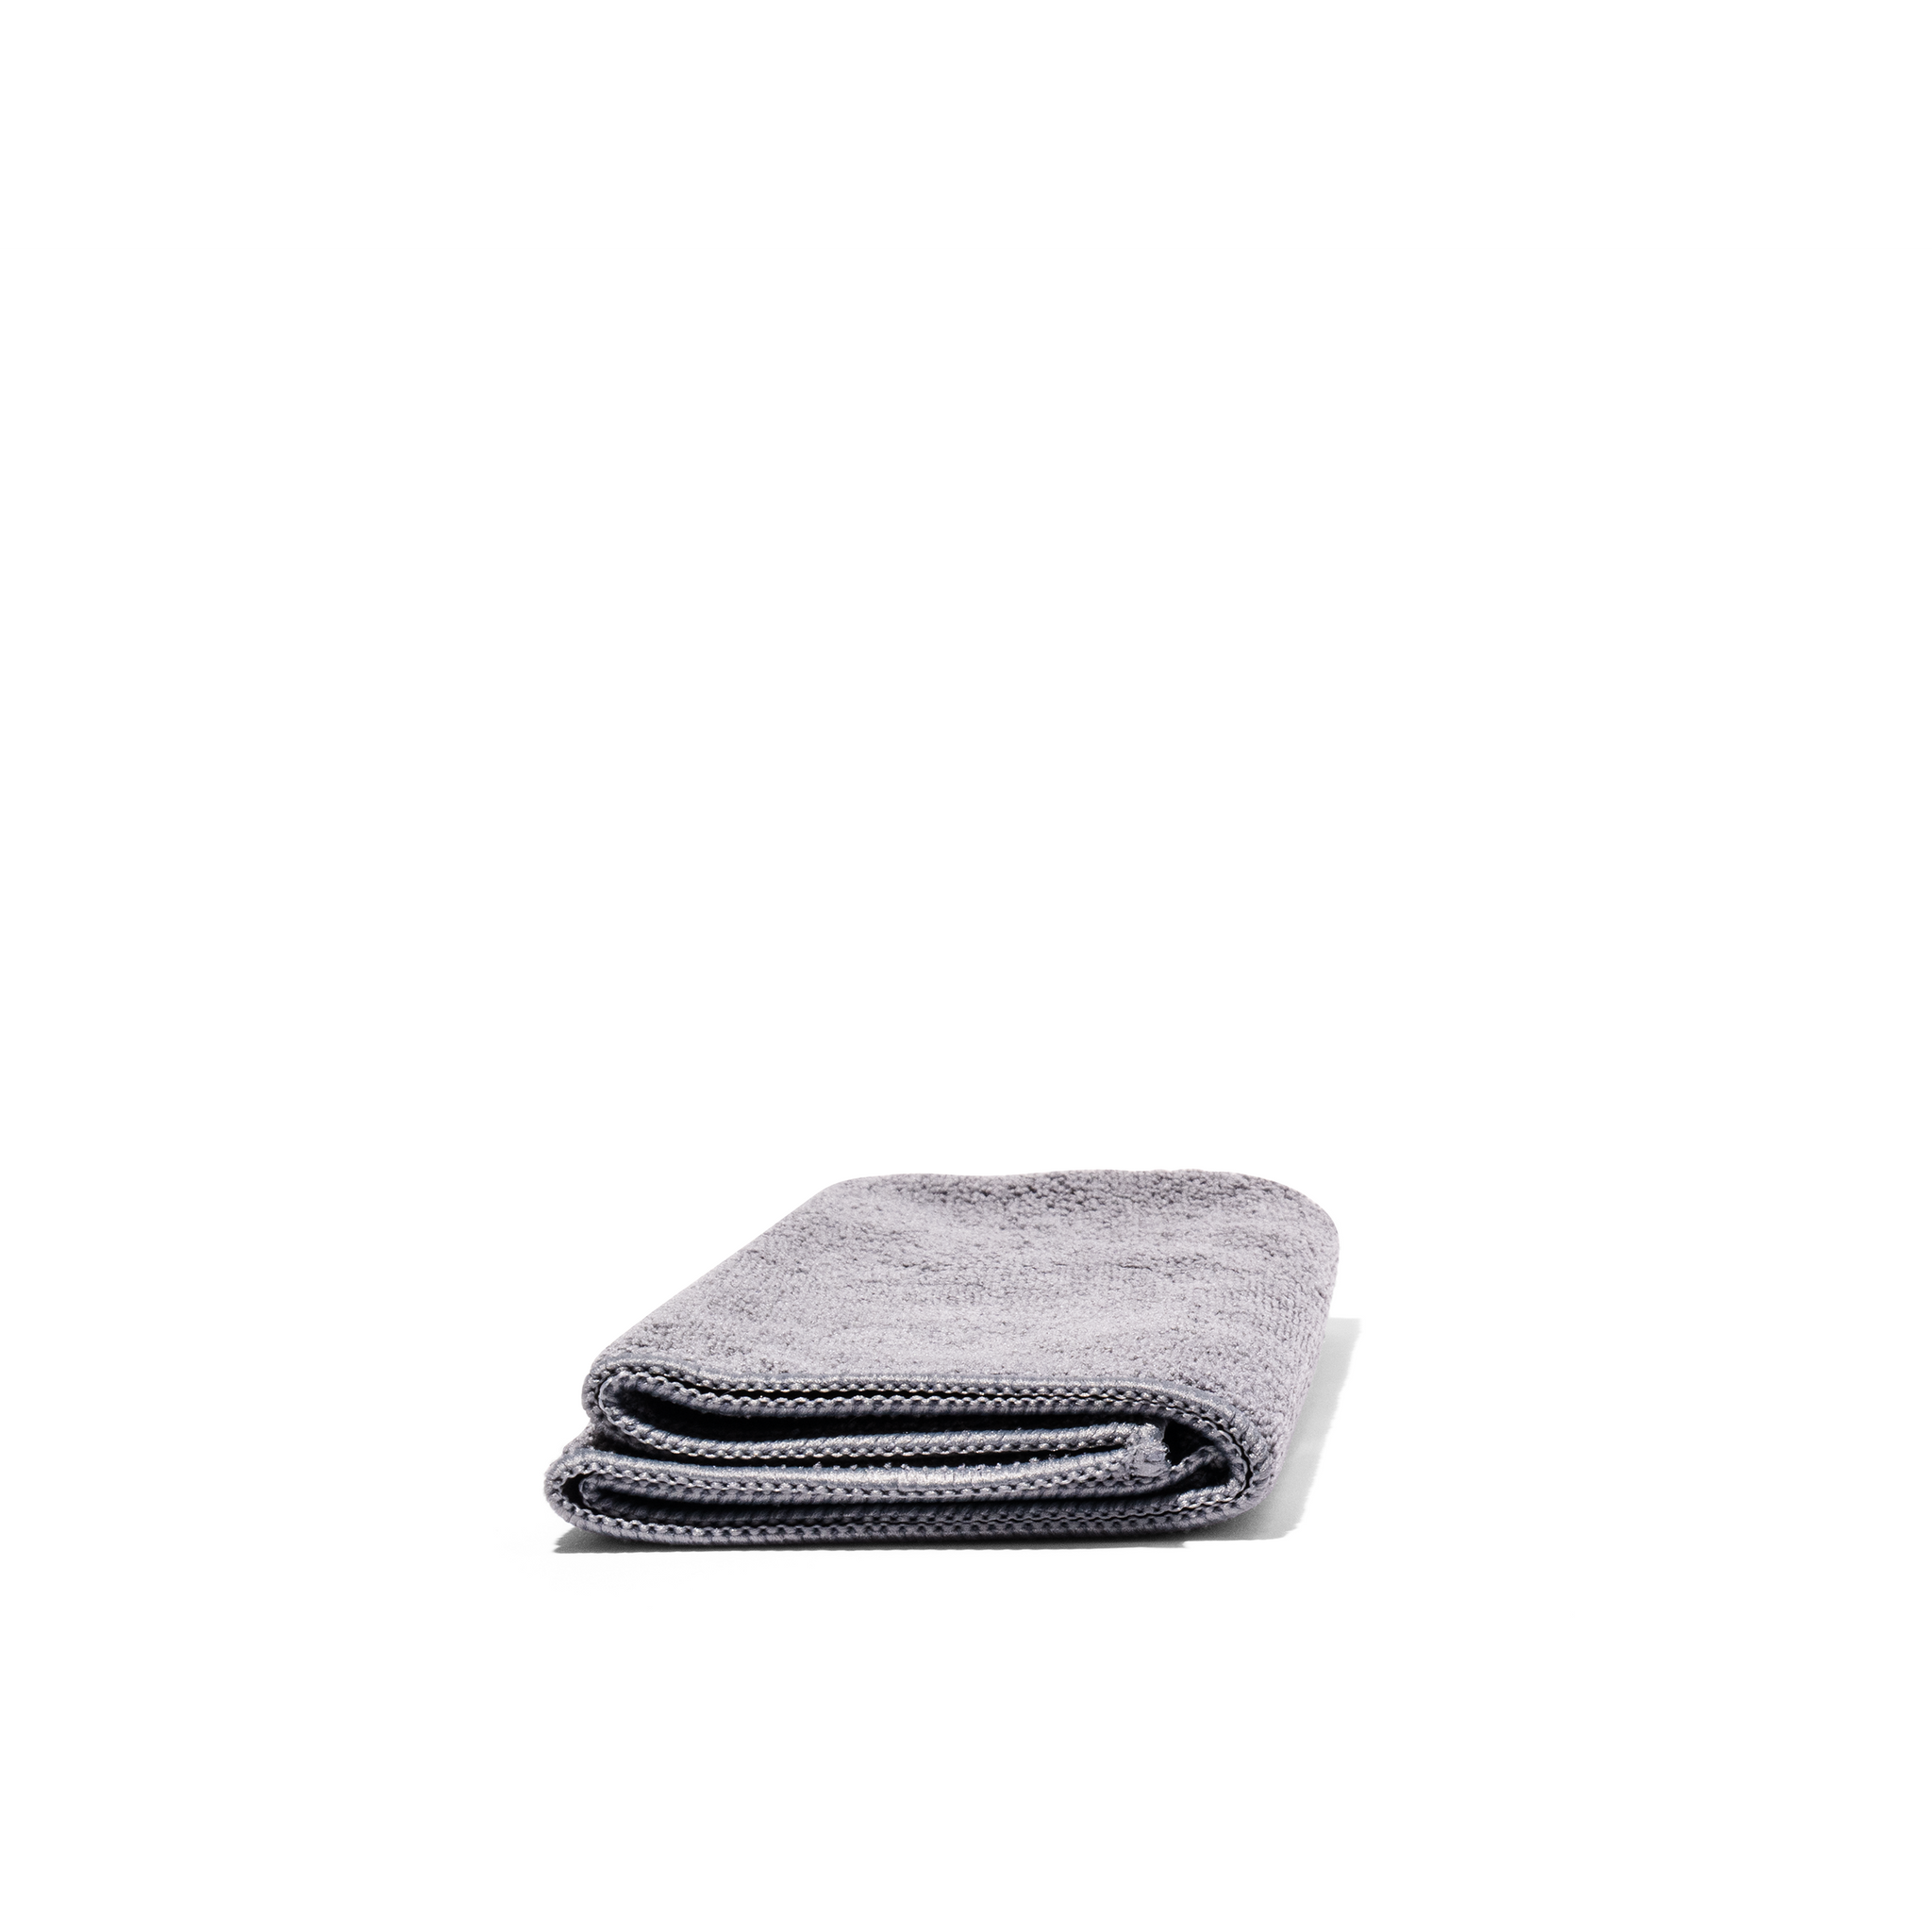 Stainless Steel Microfiber Cloth 16" x 16" 300 GSM